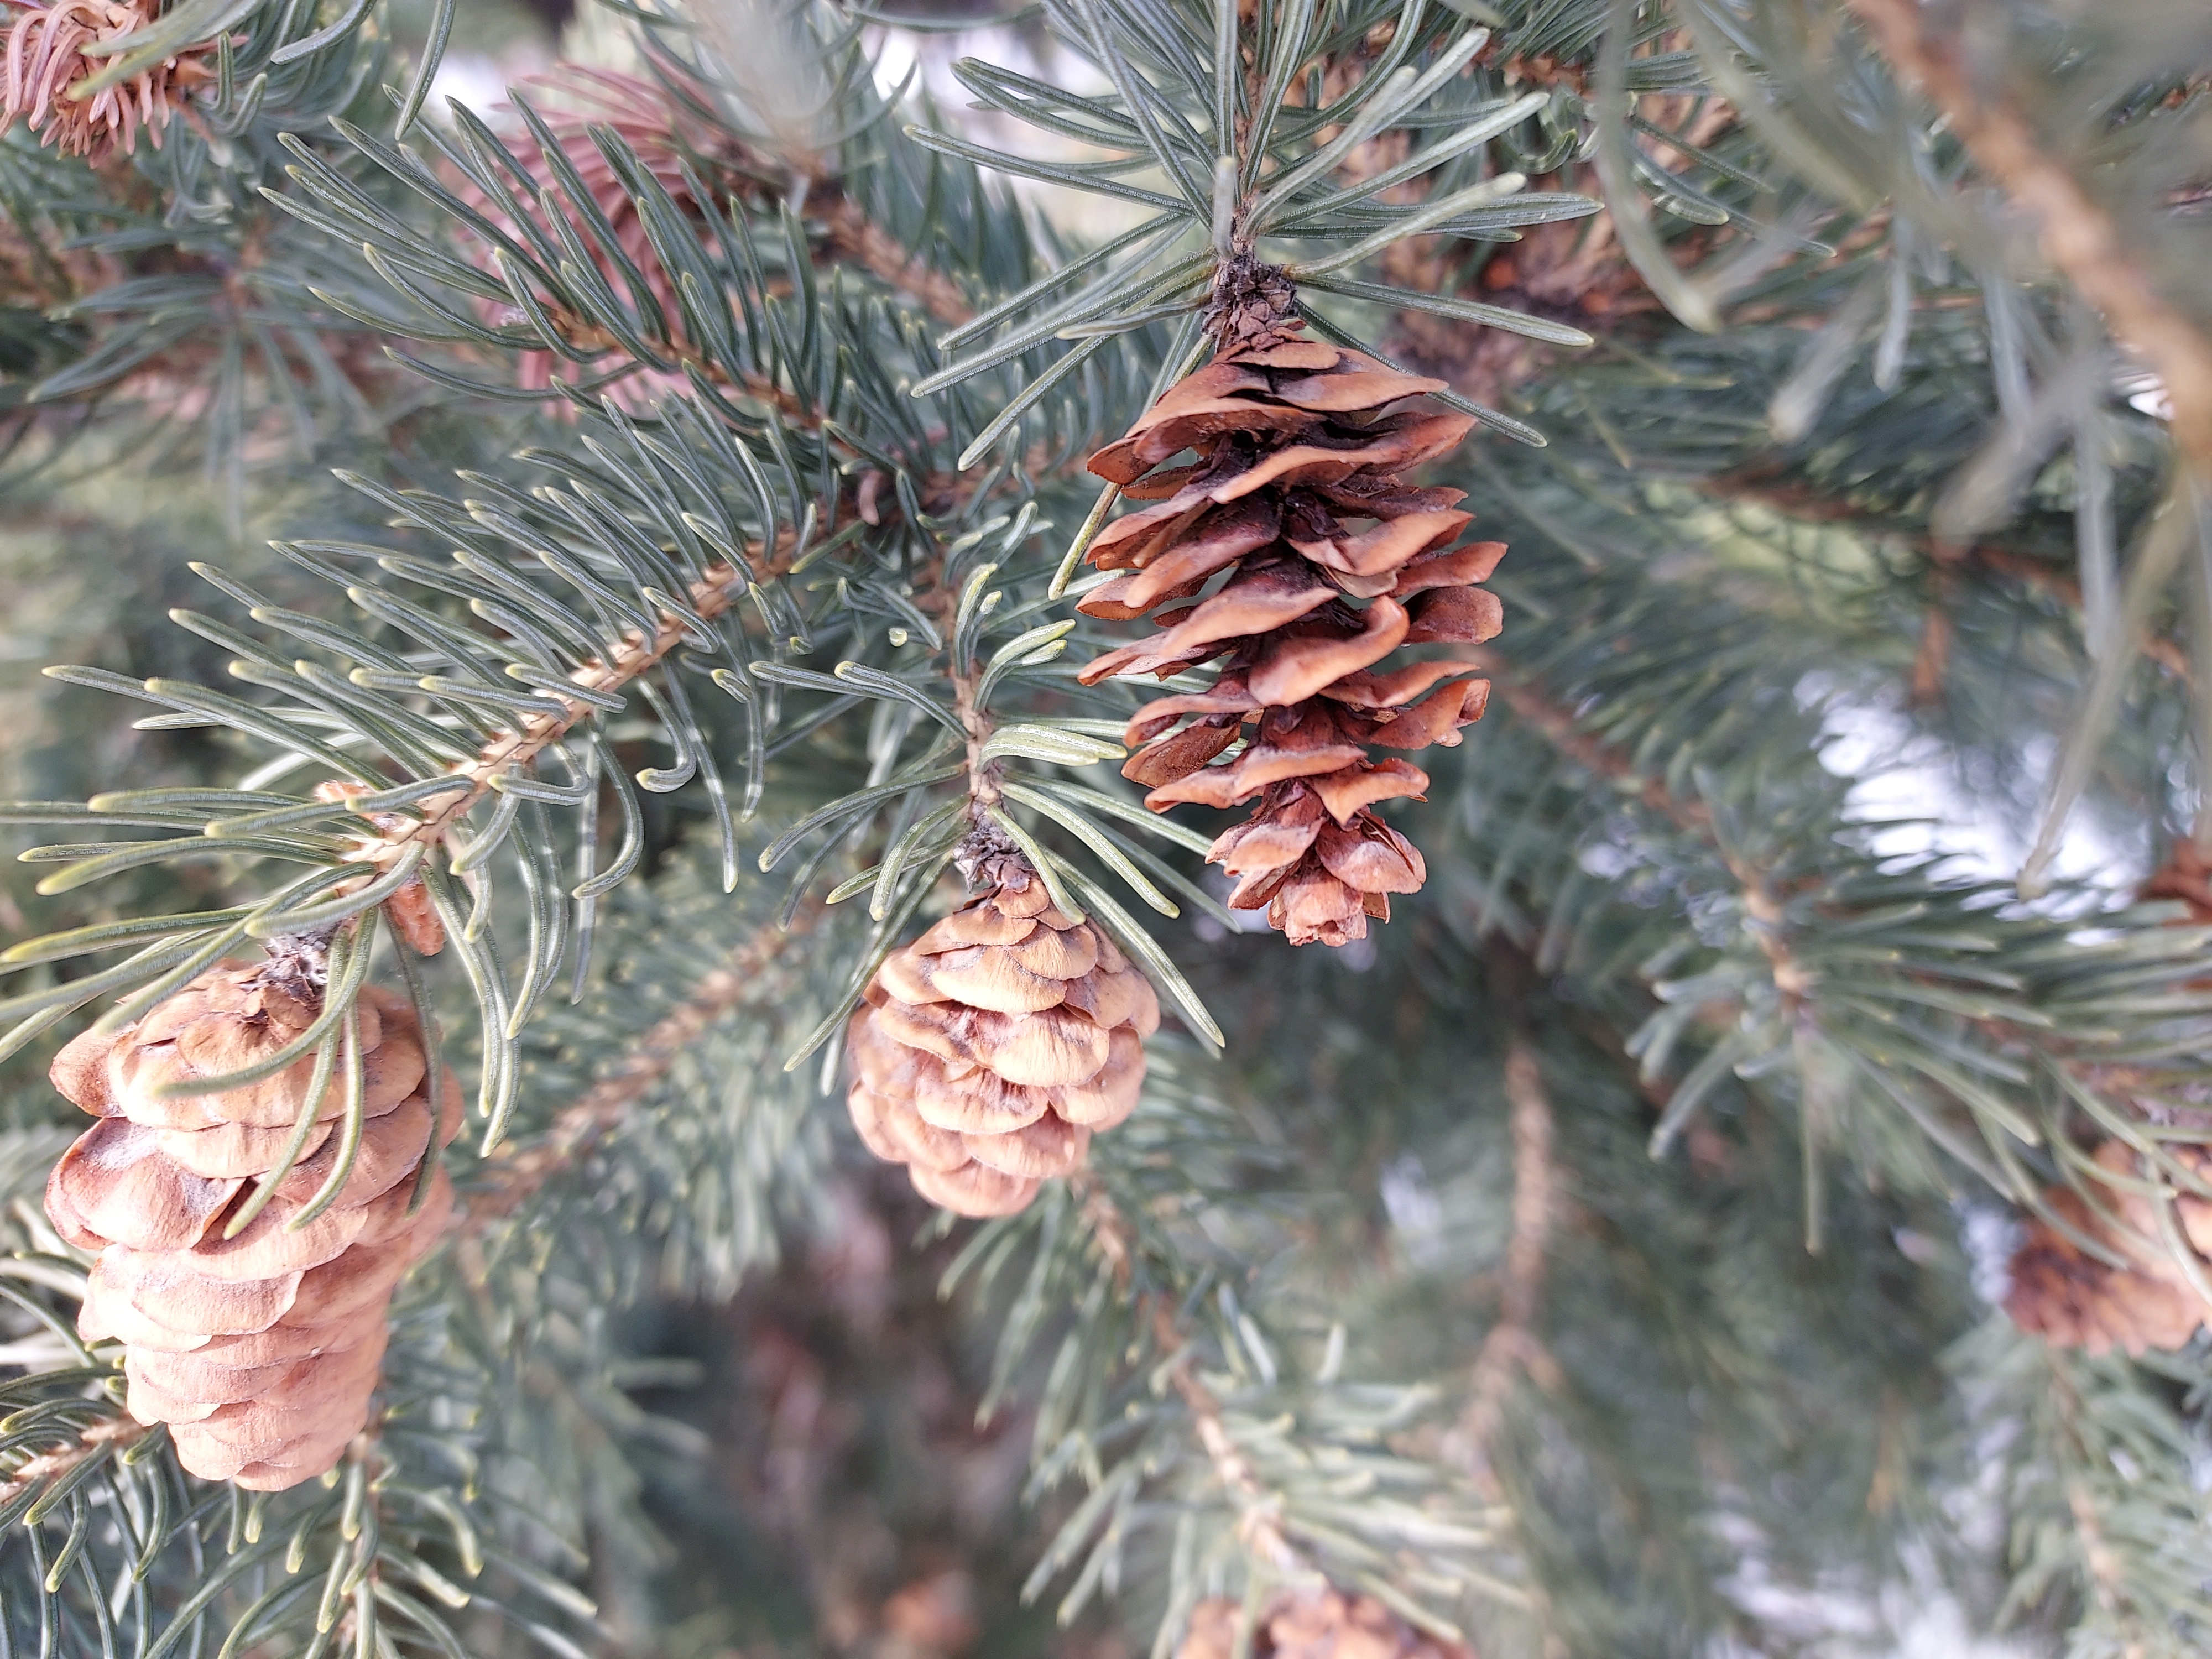 This photo shows several Black Hills spruce cones hanging from a branch on the tree.